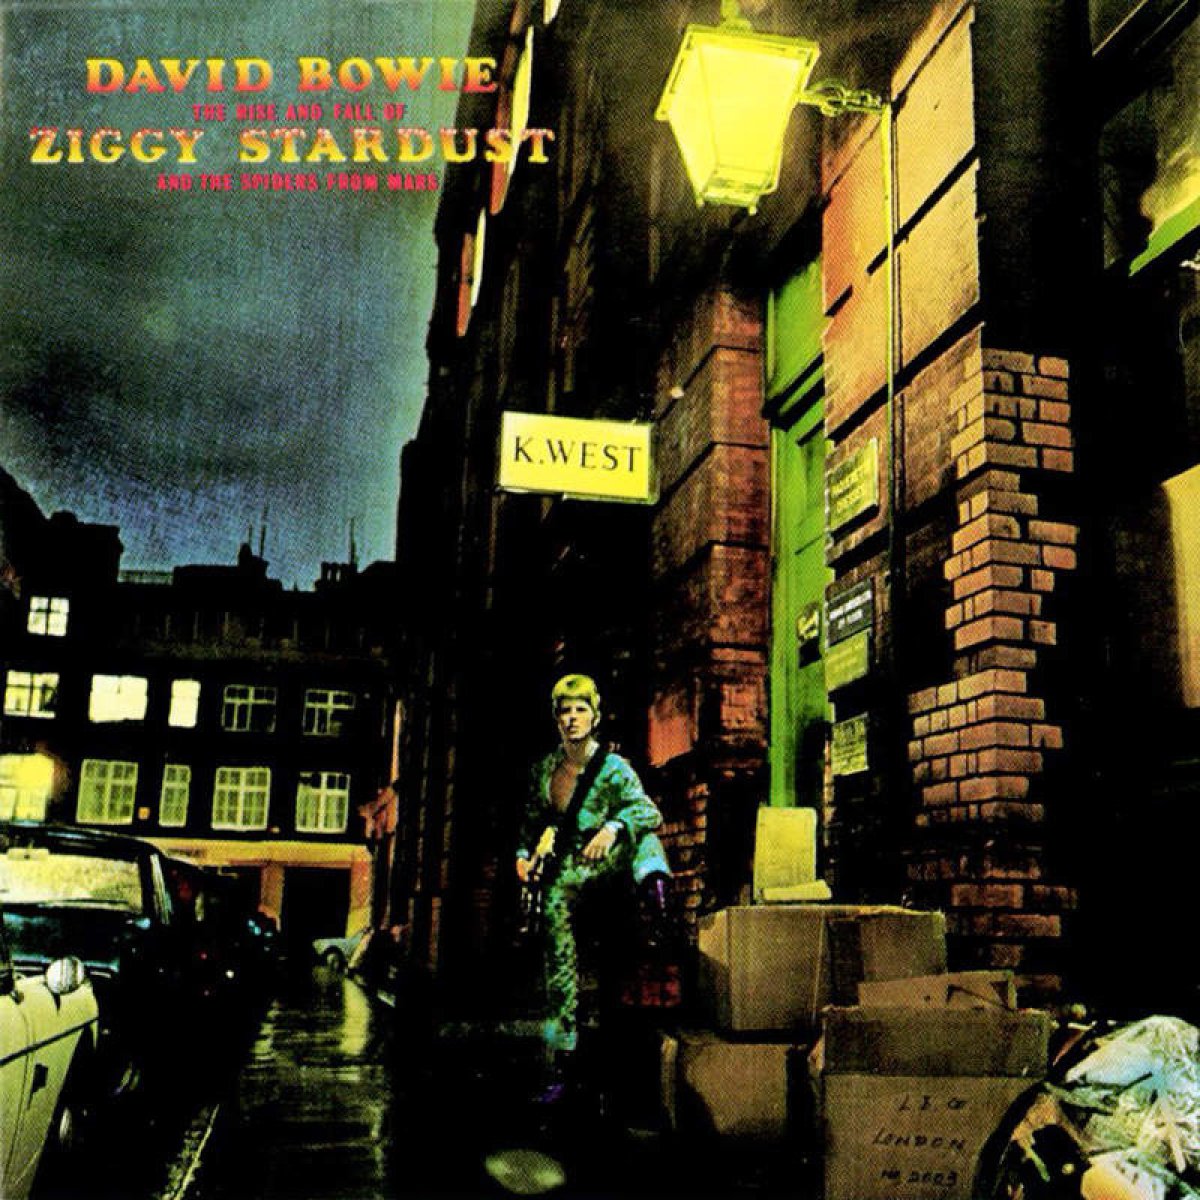 'The rise and fall of Ziggy Stardust and the Spiders from Mars' – David Bowie